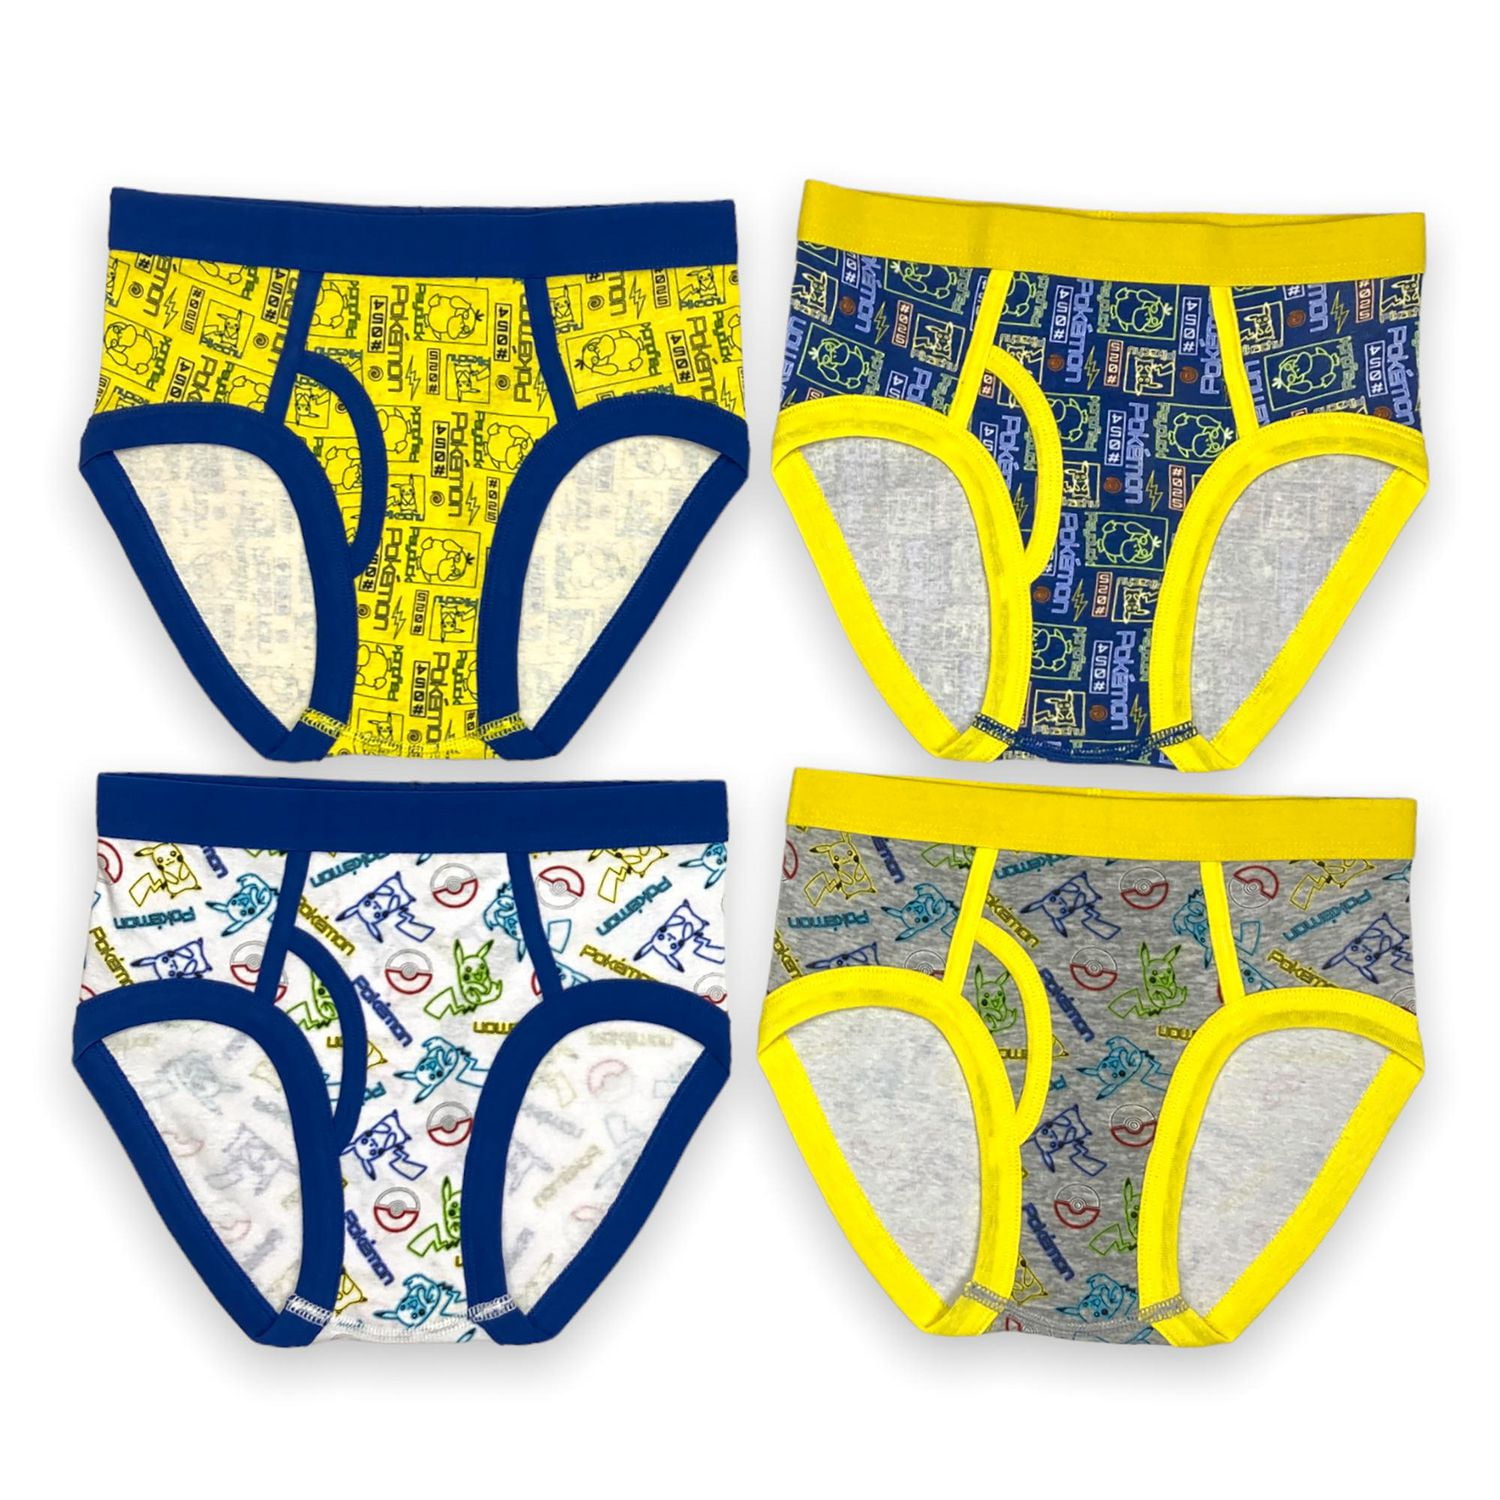 Pokemon Boy's briefs. These boys underwear come in a pack of 4 and